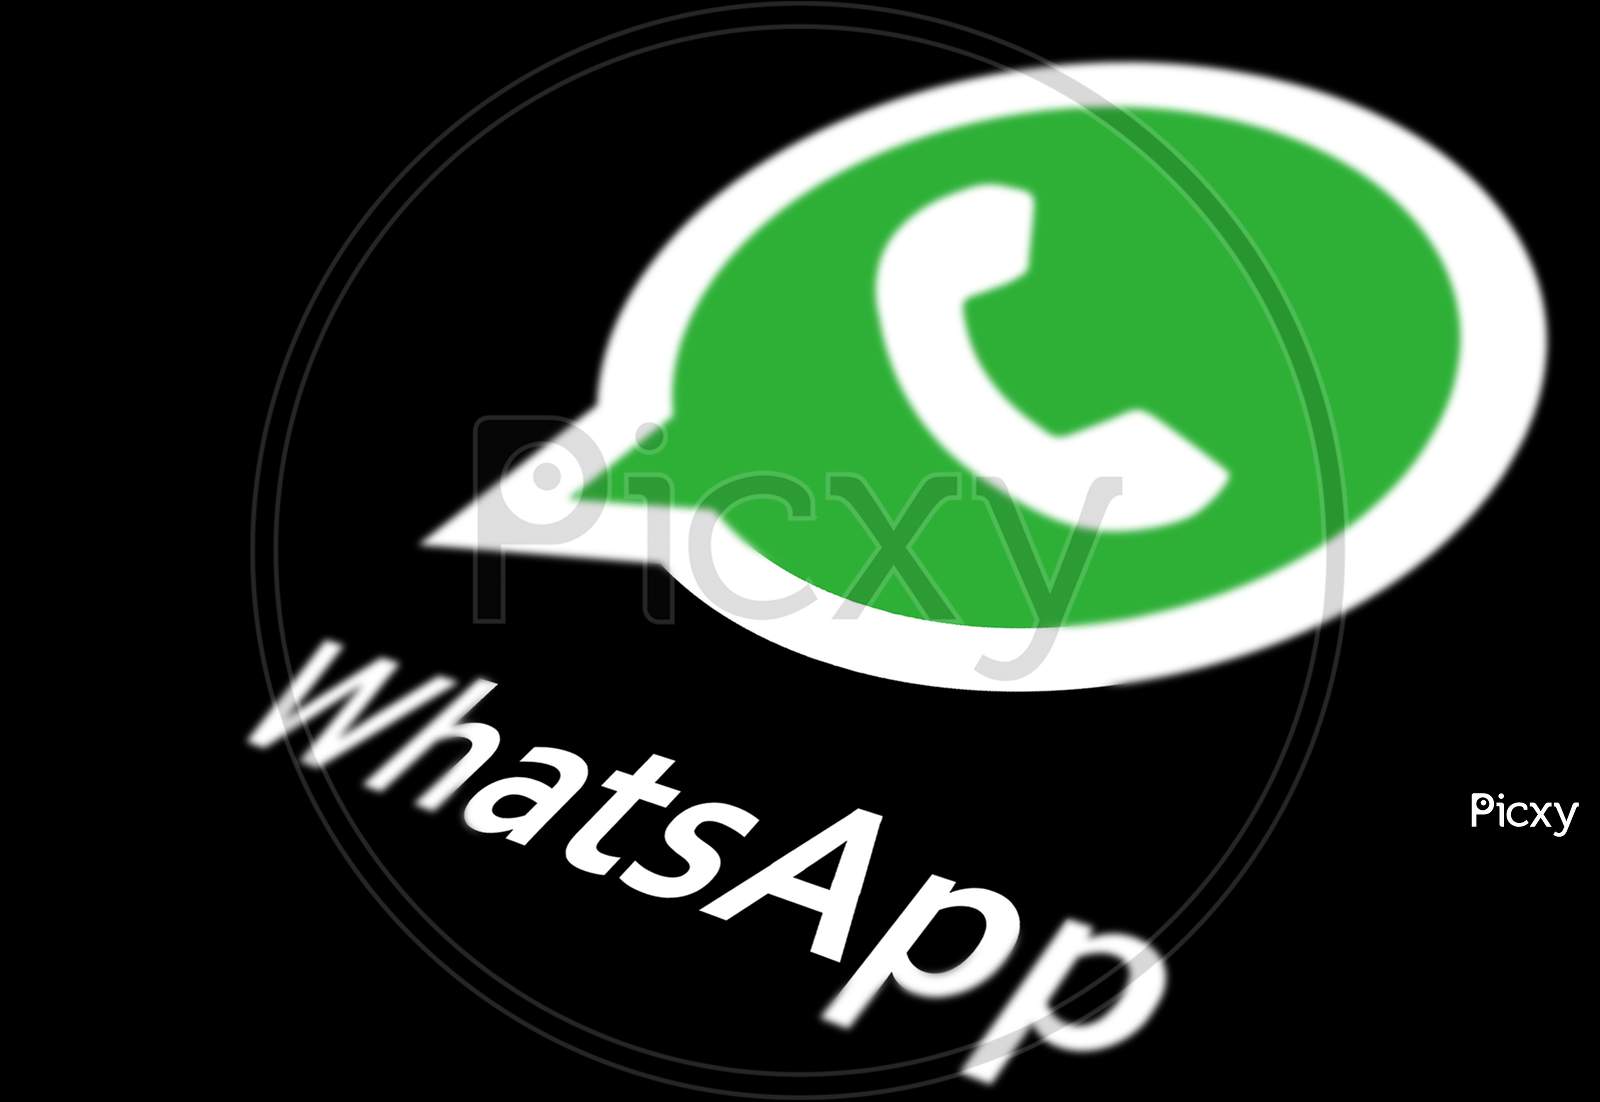 WhatsApp adds proxy support to help bypass Internet blocks